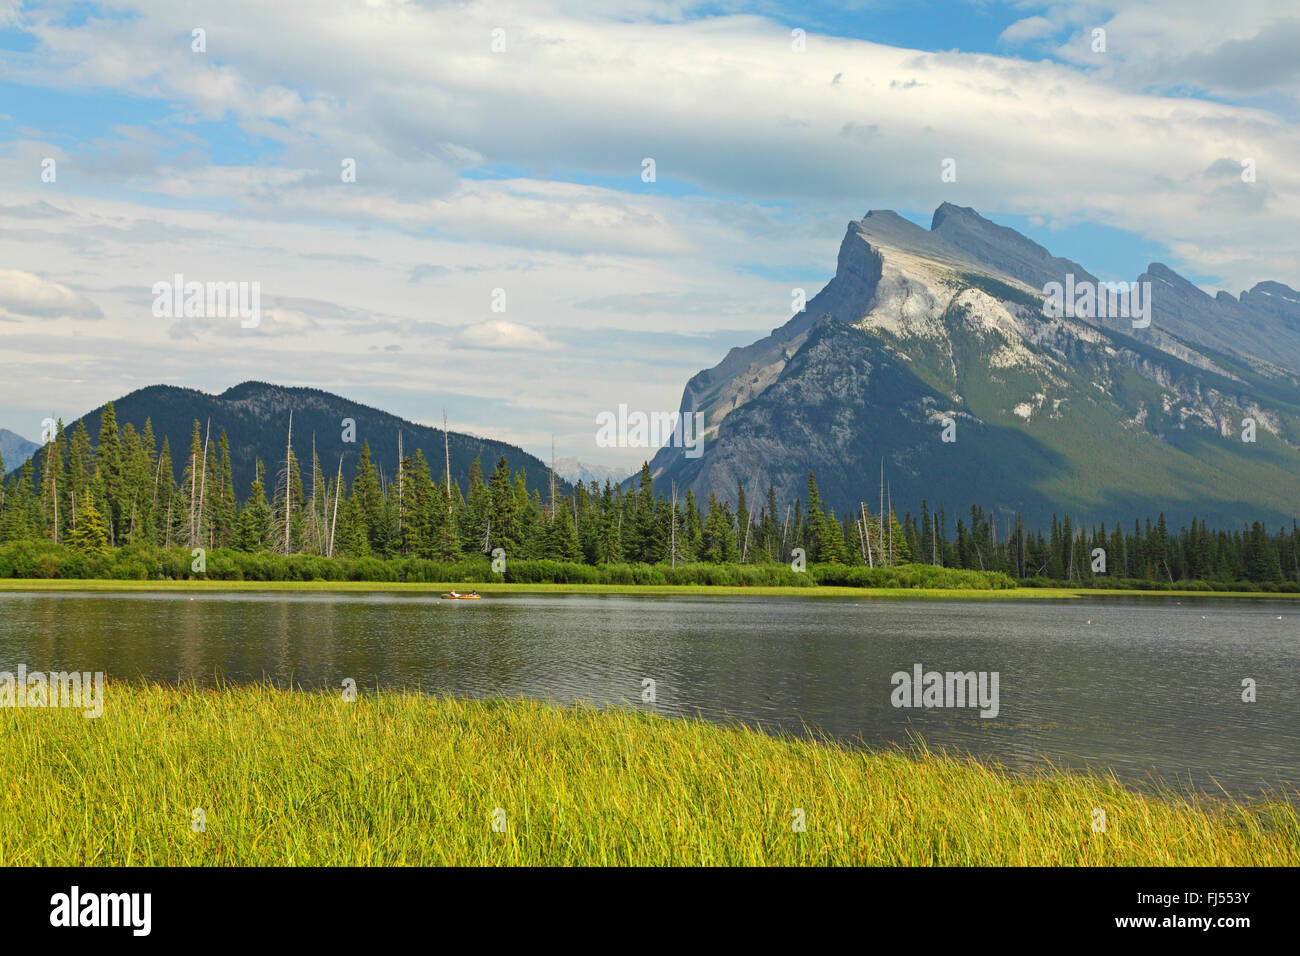 Vermilion Lakes with Mount Rundle, Canada, Alberta, Banff National Park Stock Photo